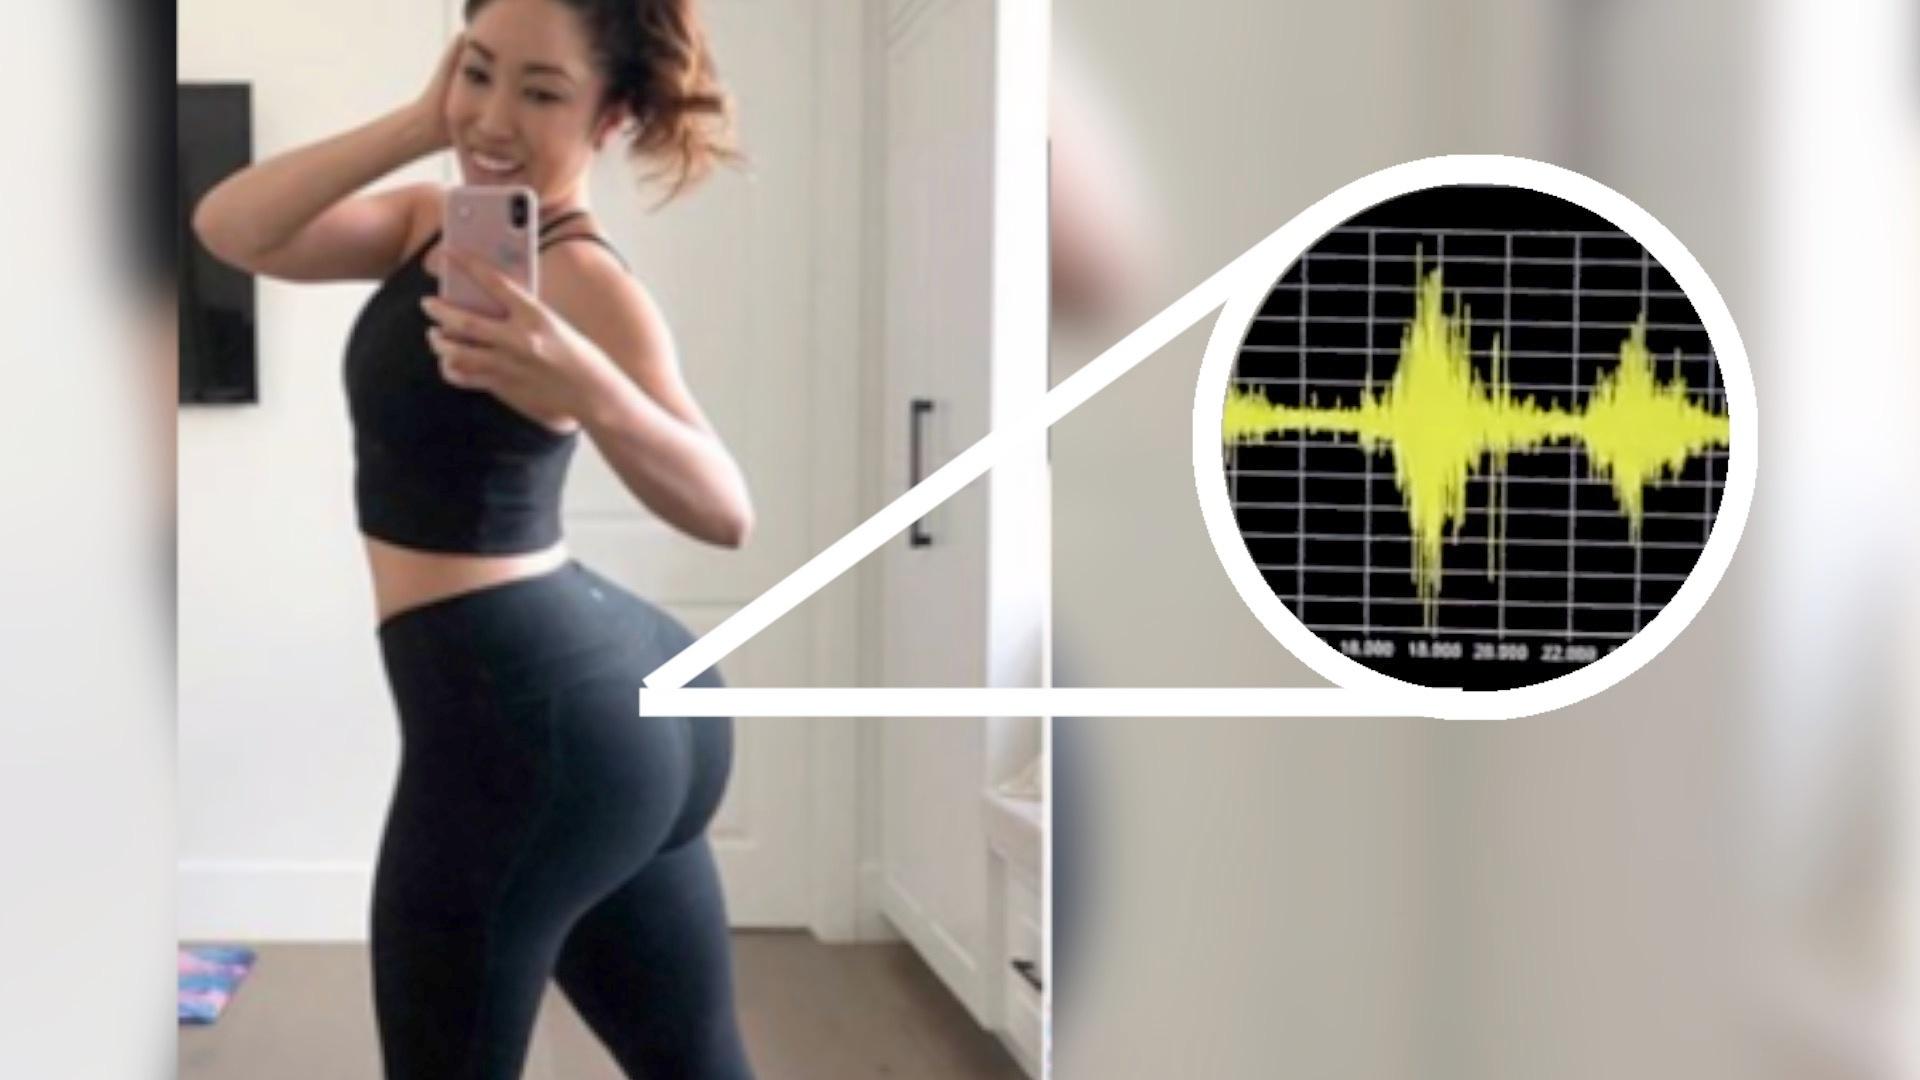 Big Bum Theory: The fascination with curvy hips - The Standard Health